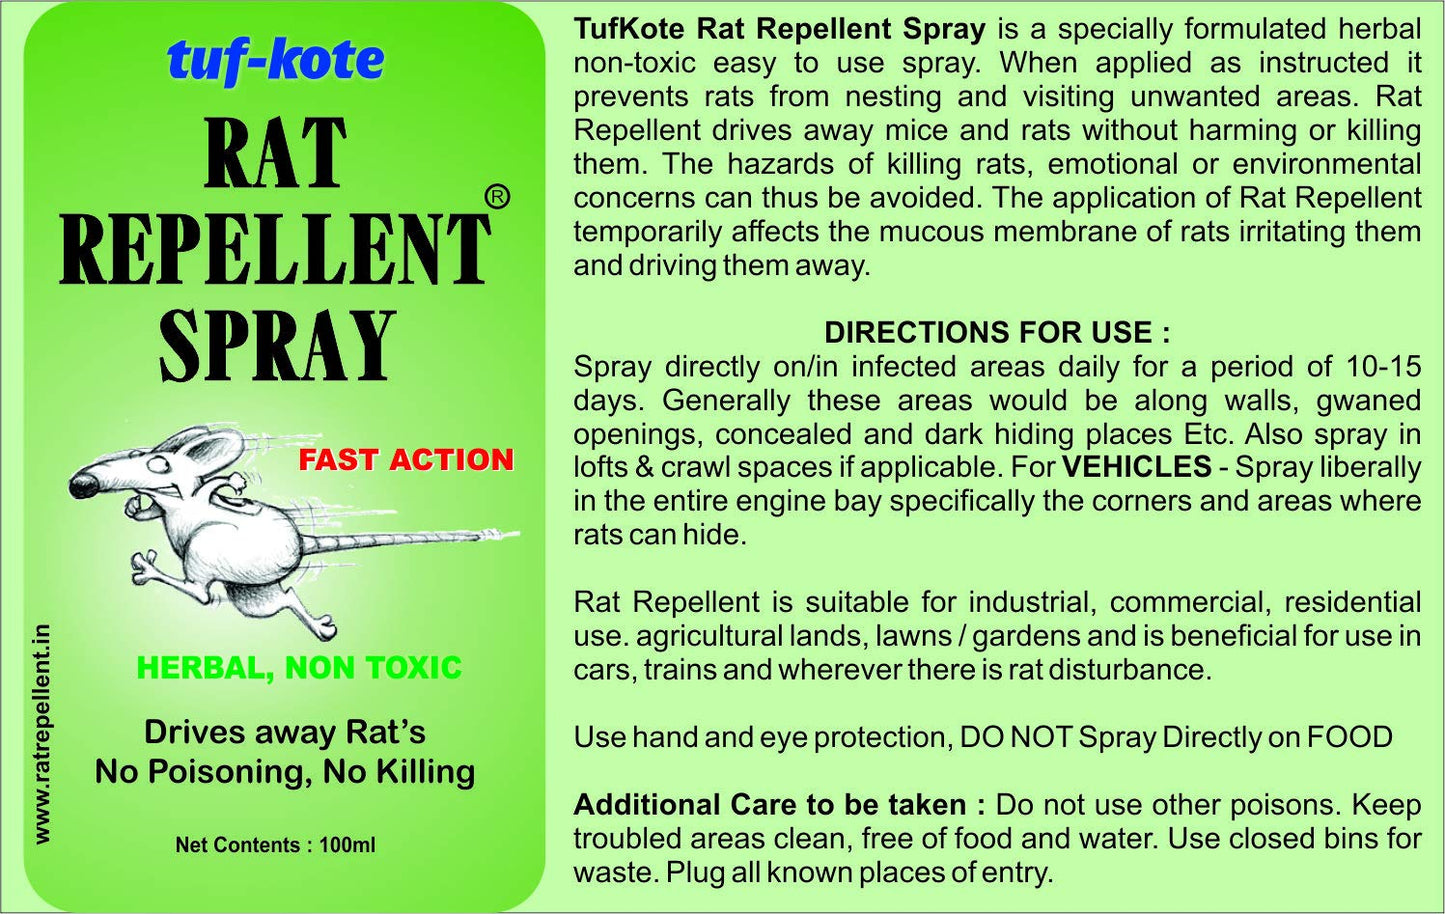 tuf-kote®  Rat Repellent Combo, Non-Poisonous, Drive Away Rats Without Killing Them - Combo Set of 20g x 2 Bottles + 100ml Herbal Spray